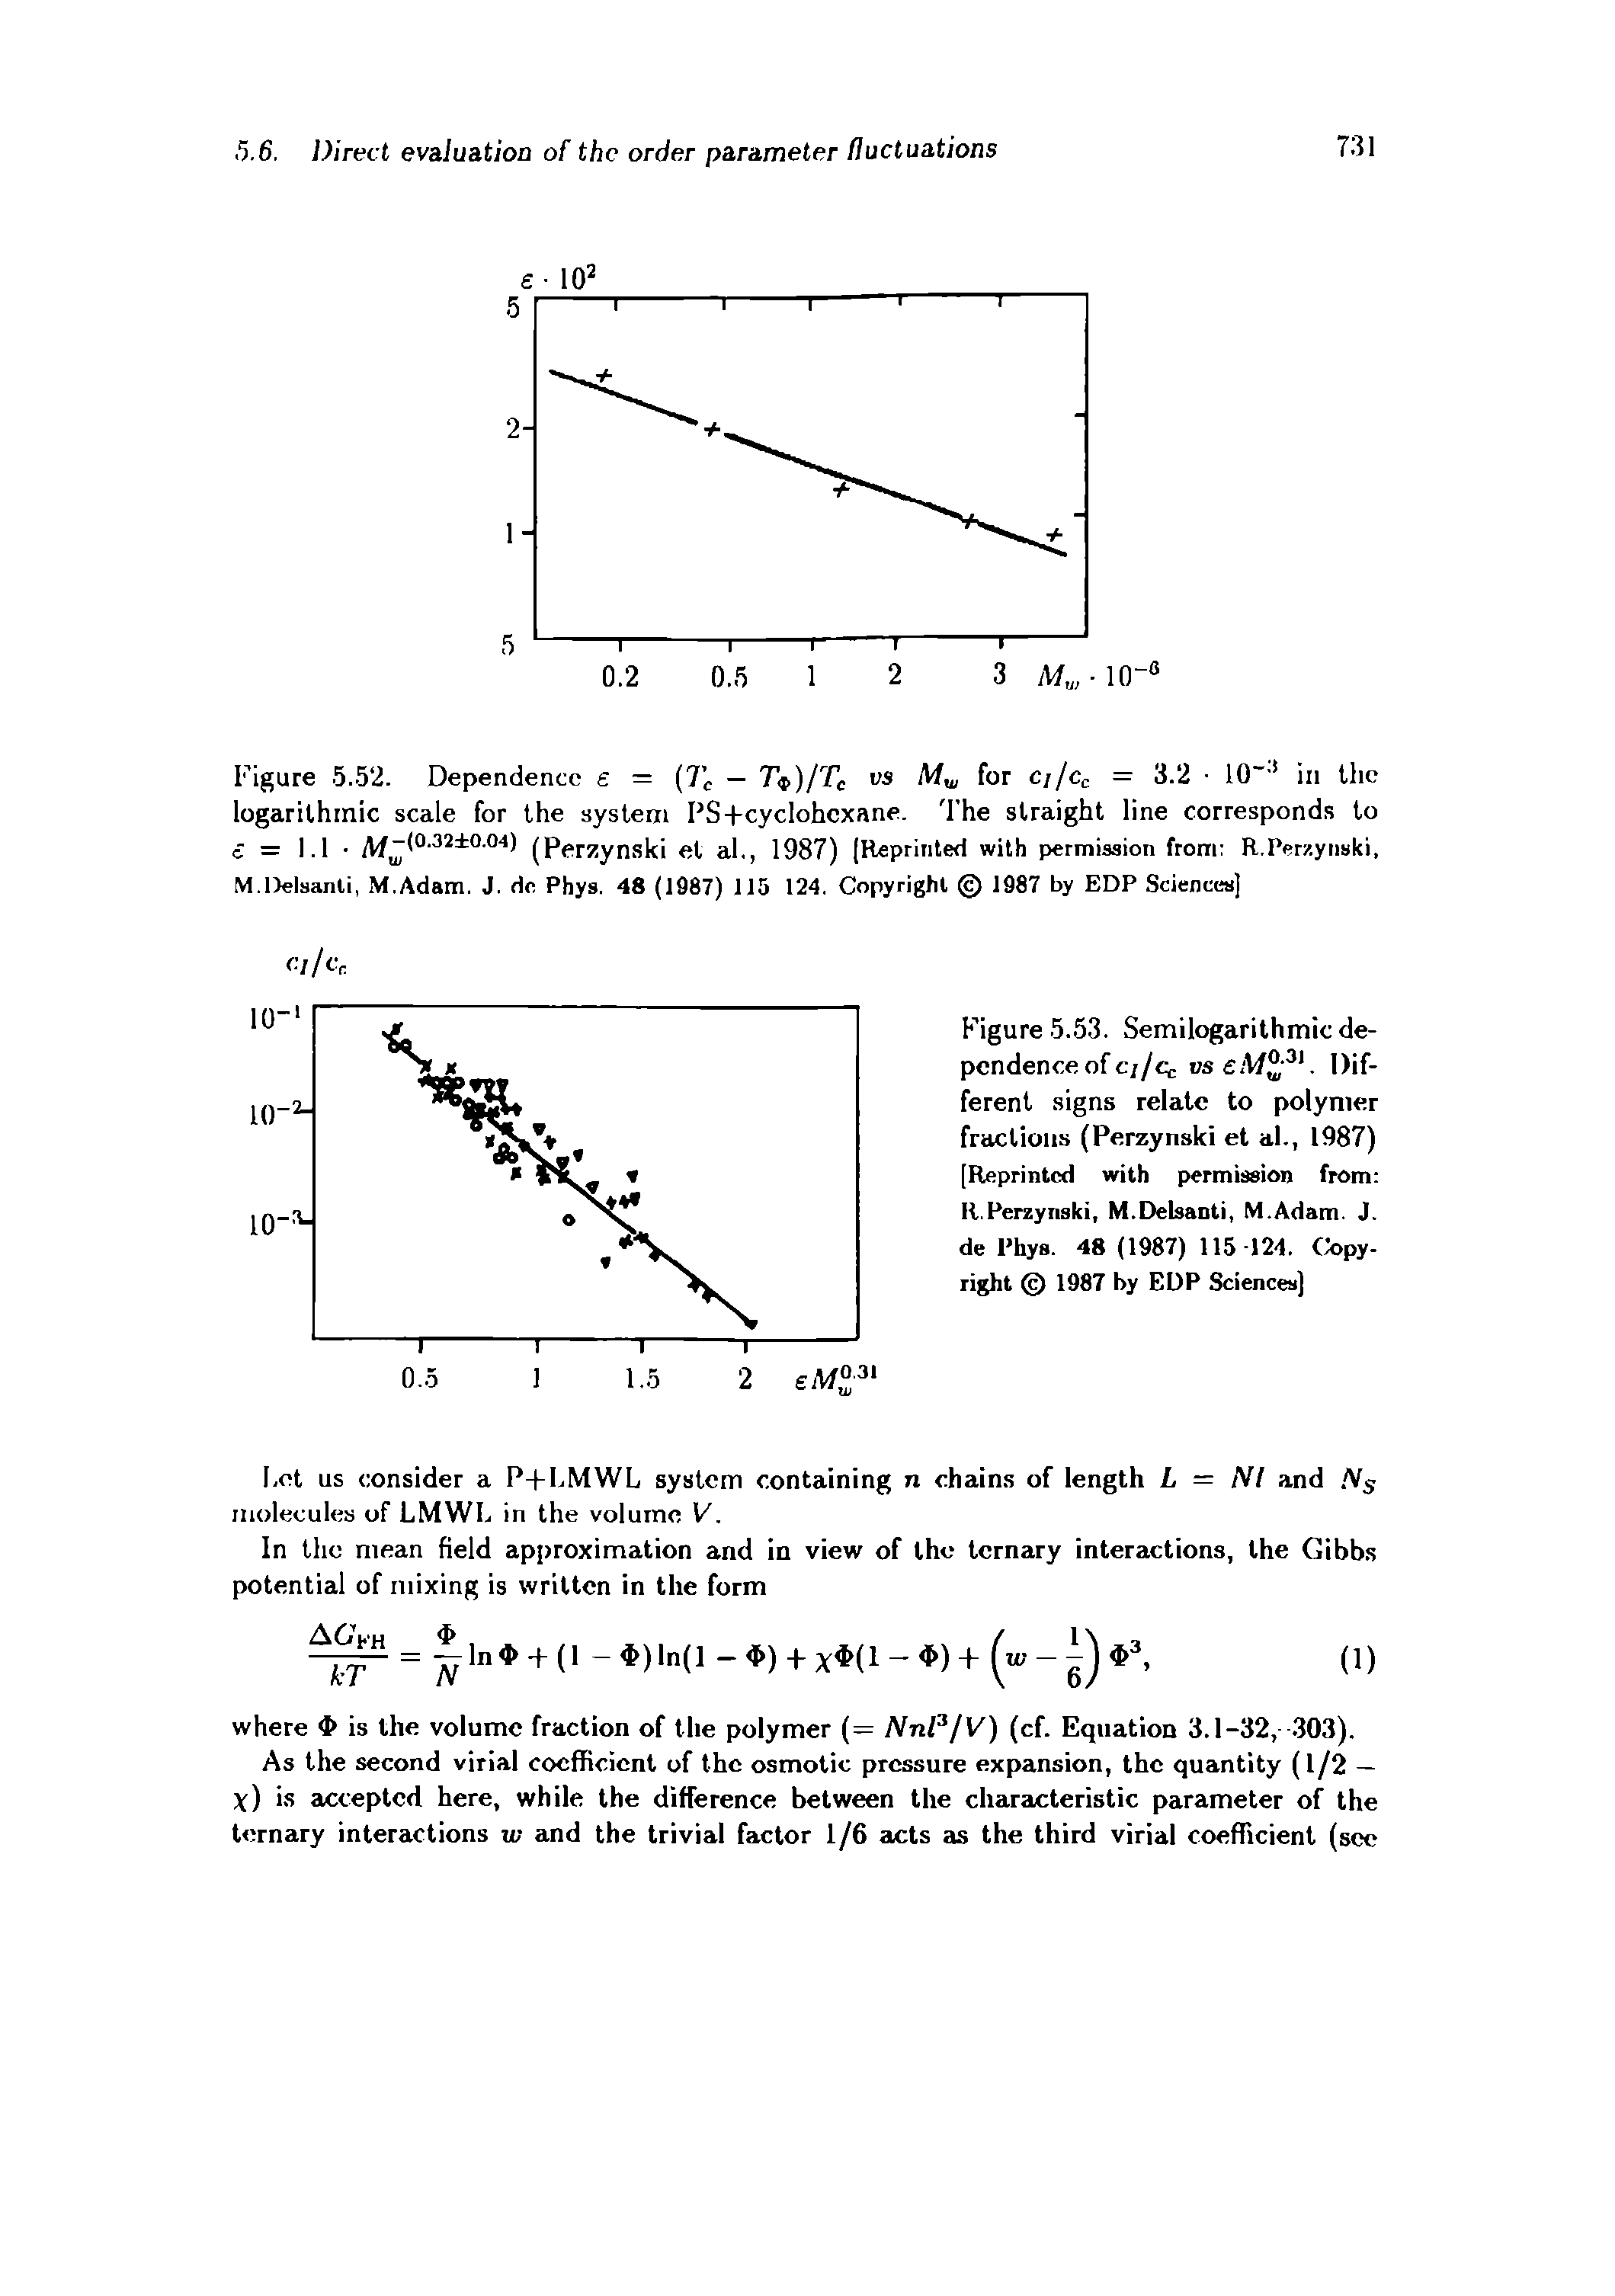 Figure 5.53. Semilogarithmic dependence of c//c c vseM -. Different signs relate to polymer fractions (Perzynski et al., 1987) [Reprinted with permission from ll.Perzynski, M.Delsaoti, M.Adam. J. de Phys. 48 (1987) 115 124. Ck.py-right 1987 by EDP Sciences]...